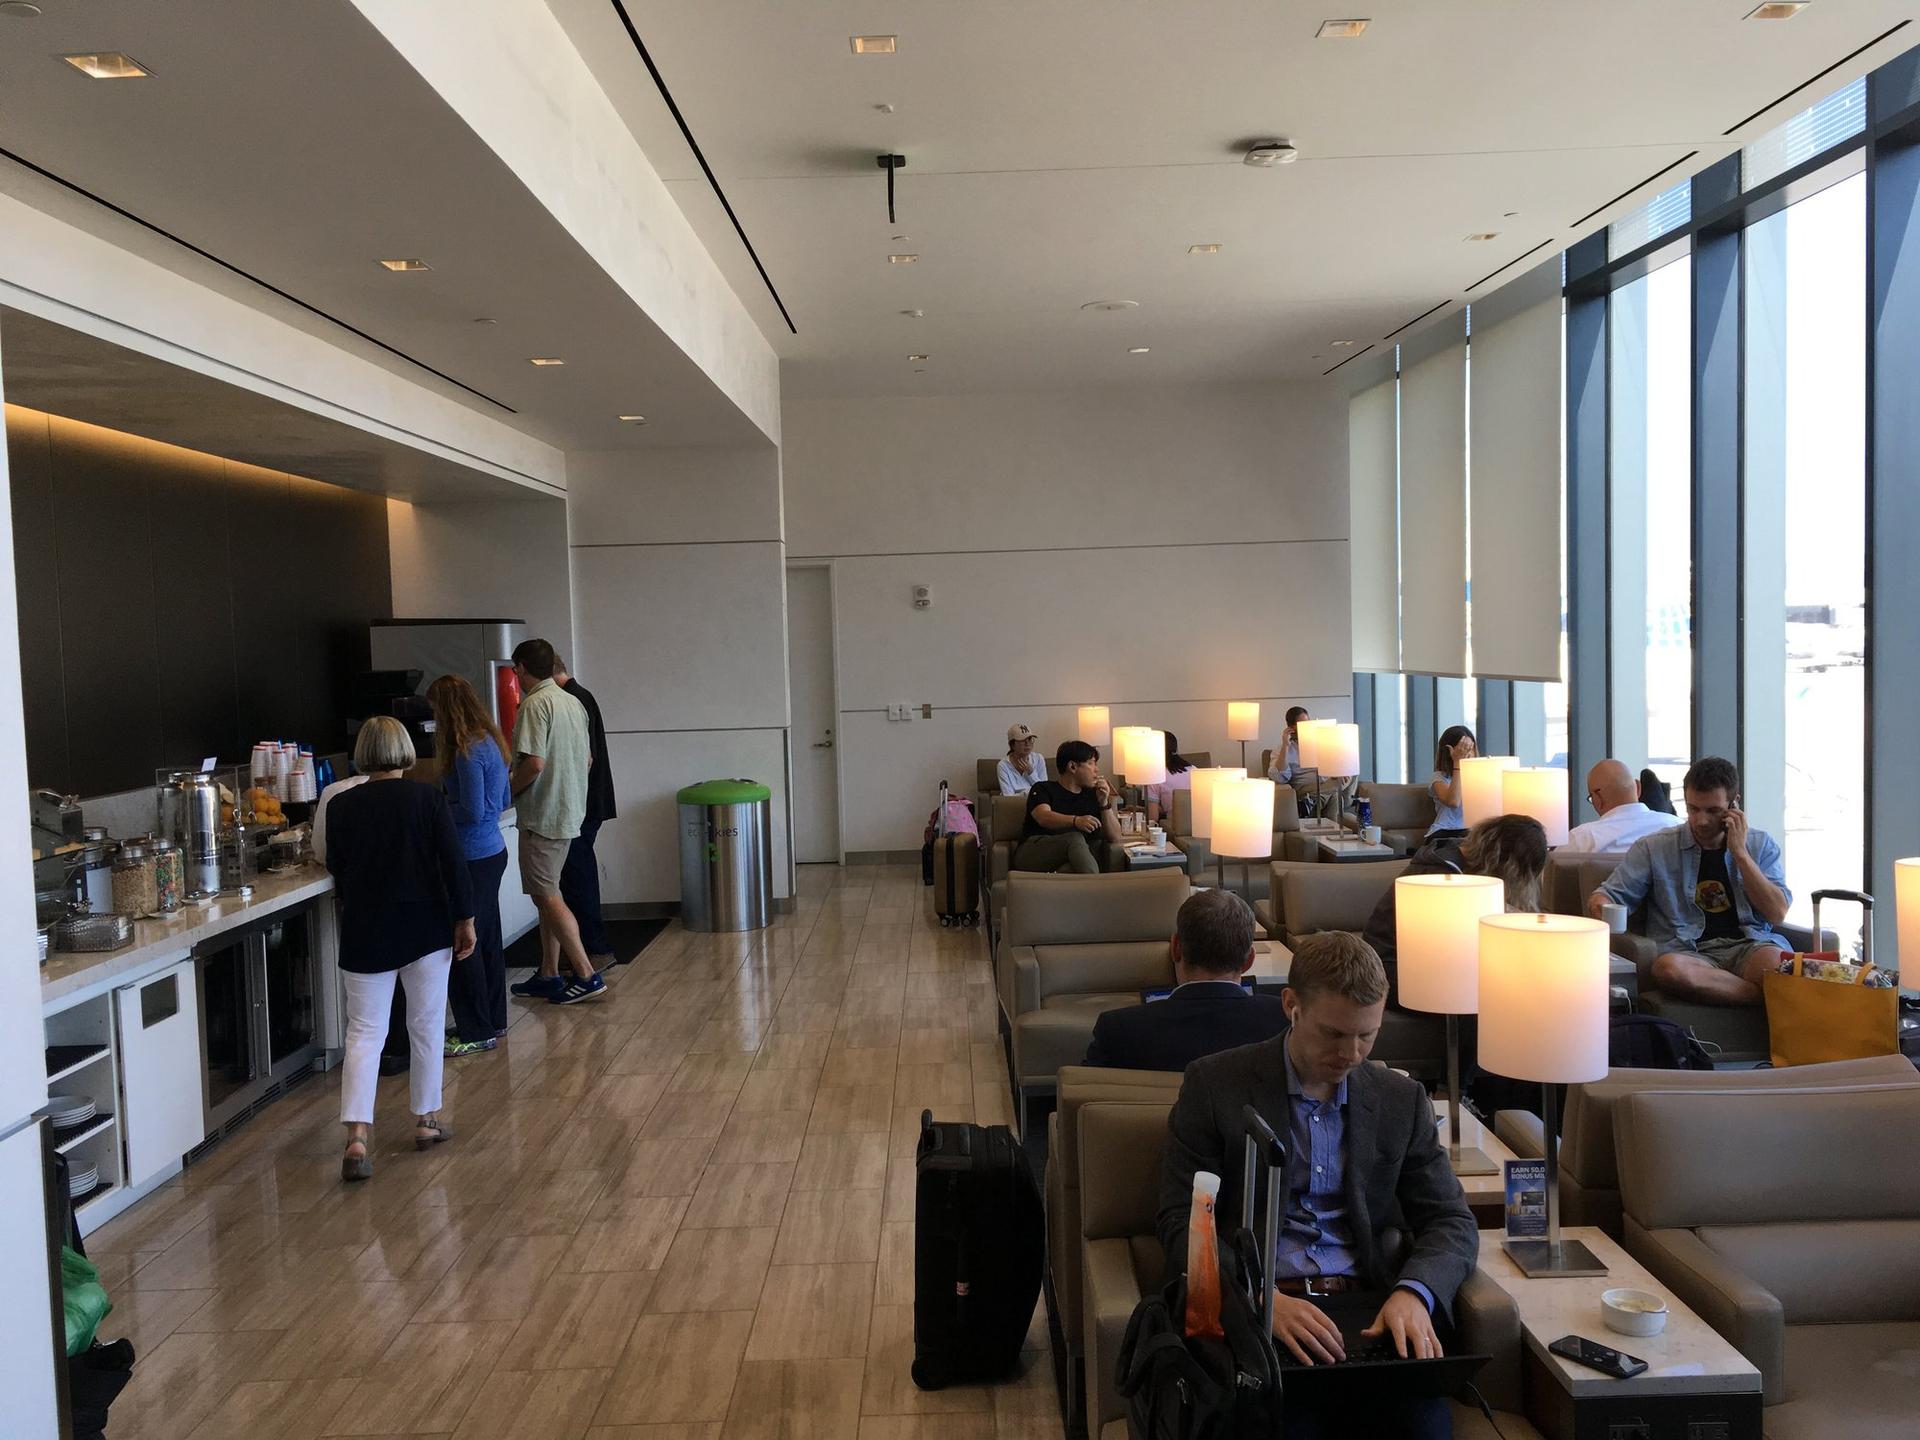 United Airlines United Club image 30 of 43